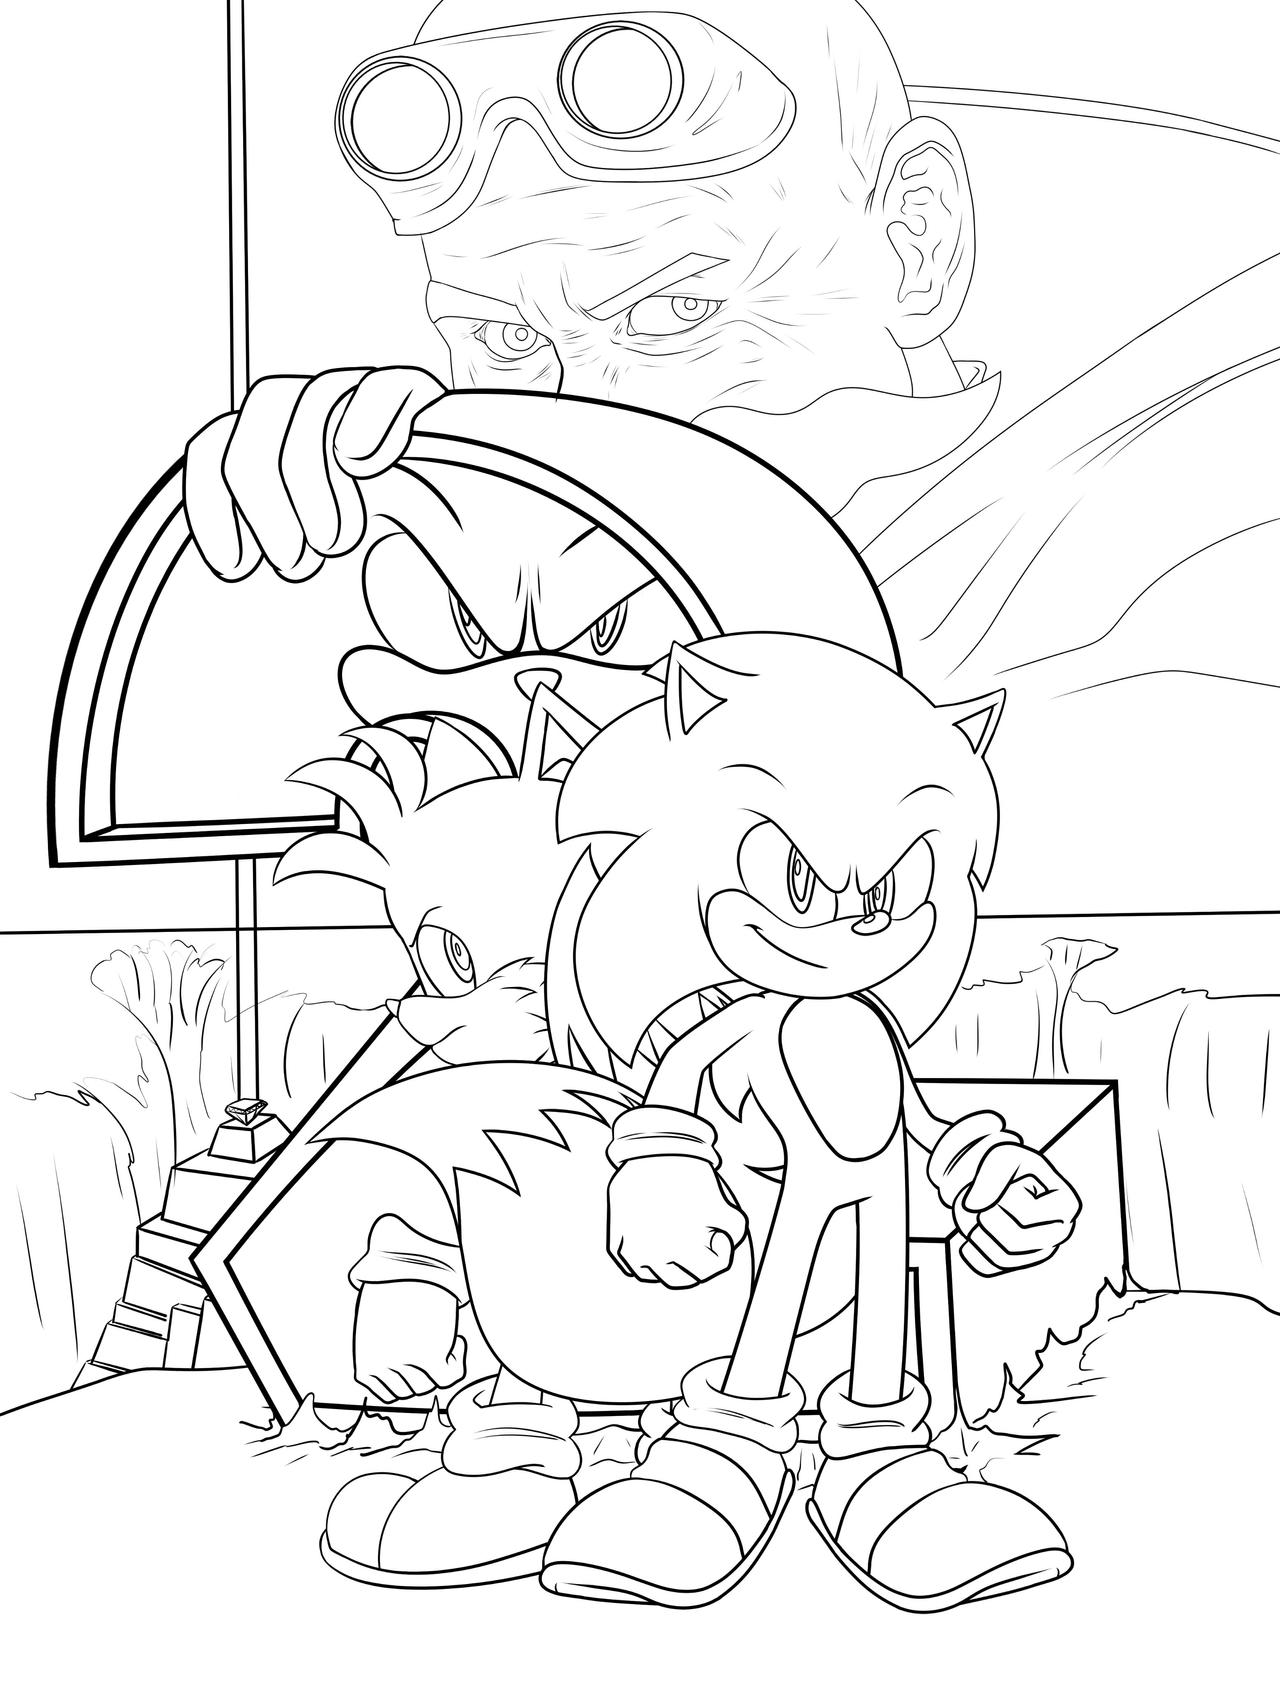 Sonic 2 Movie poster line art from Mar 31, 2022 by lANGXl on